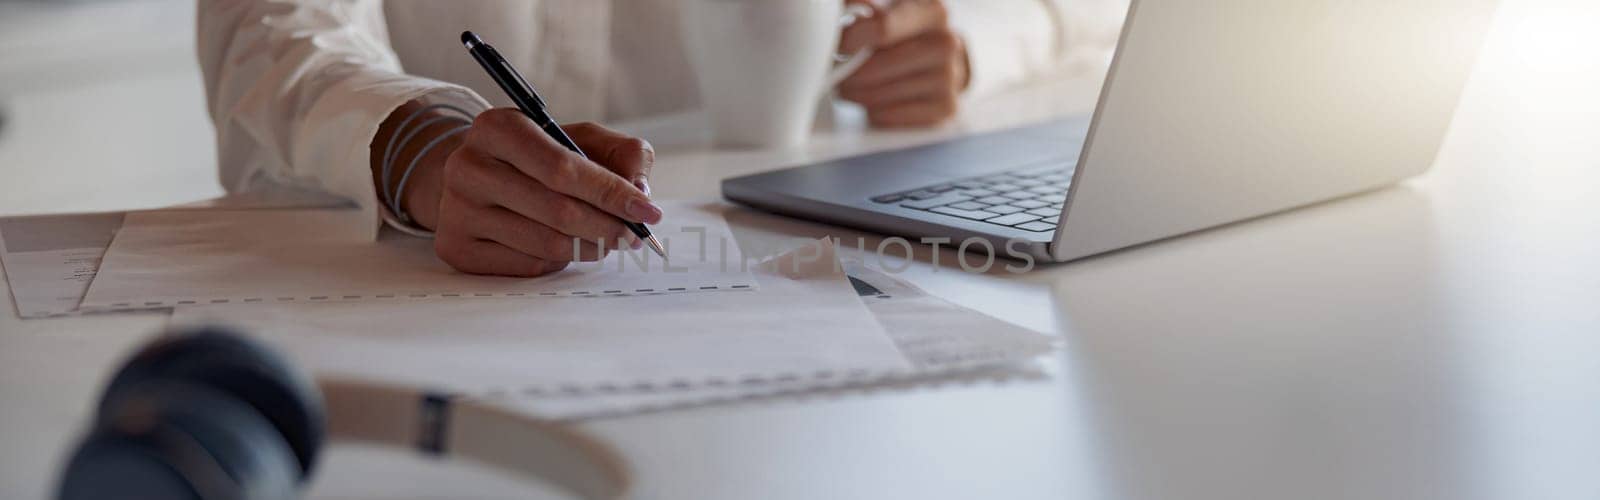 Close up of business woman working laptop and making notes sitting in office. Blurred background